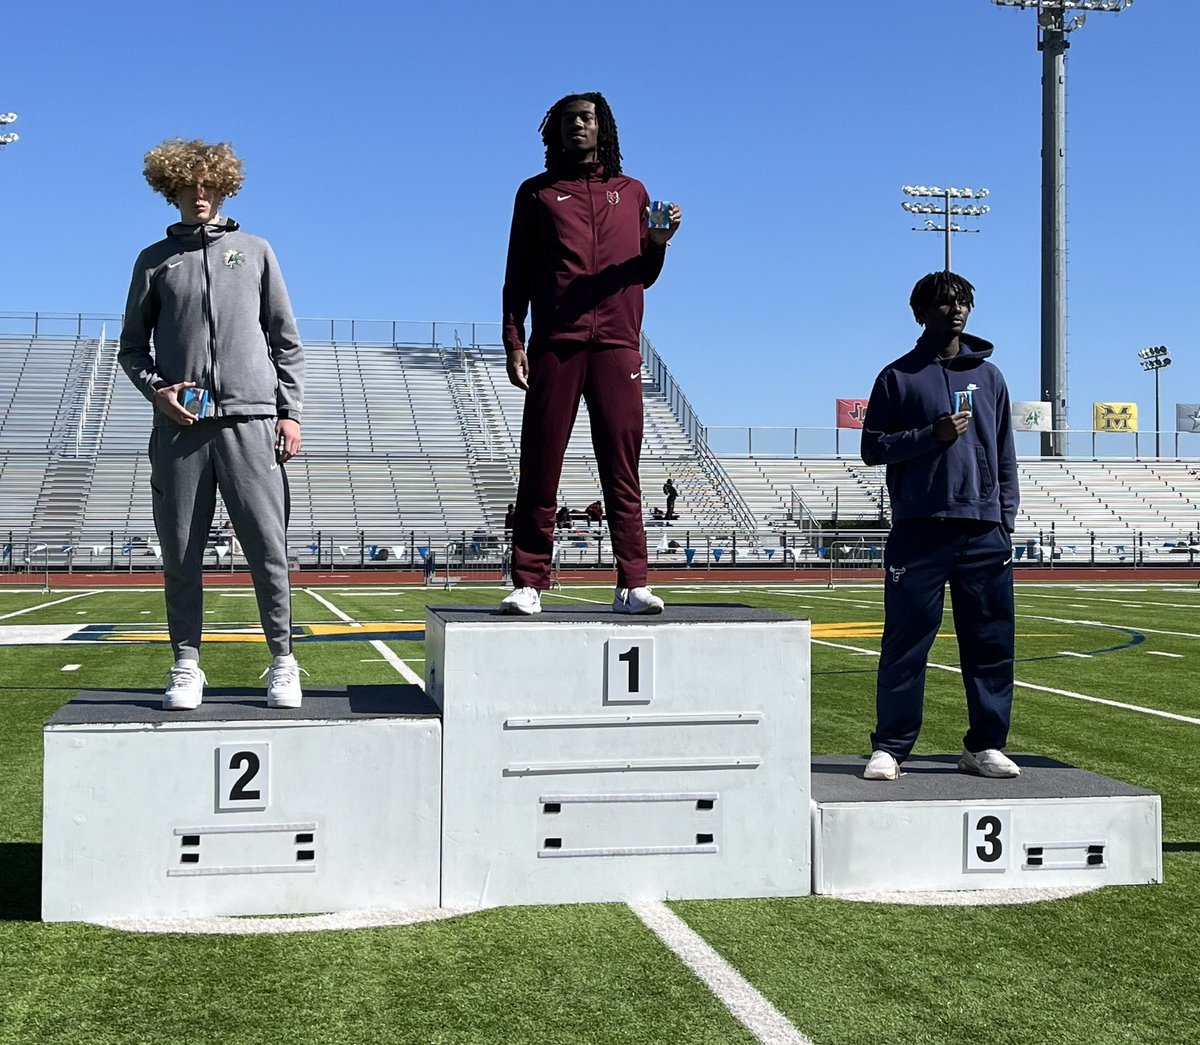 🚨District Champion Alert!!!🚨 Ethan Dixon wins the High Jump with a leap of 6’ 5” and punches his ticket to the Area Meet